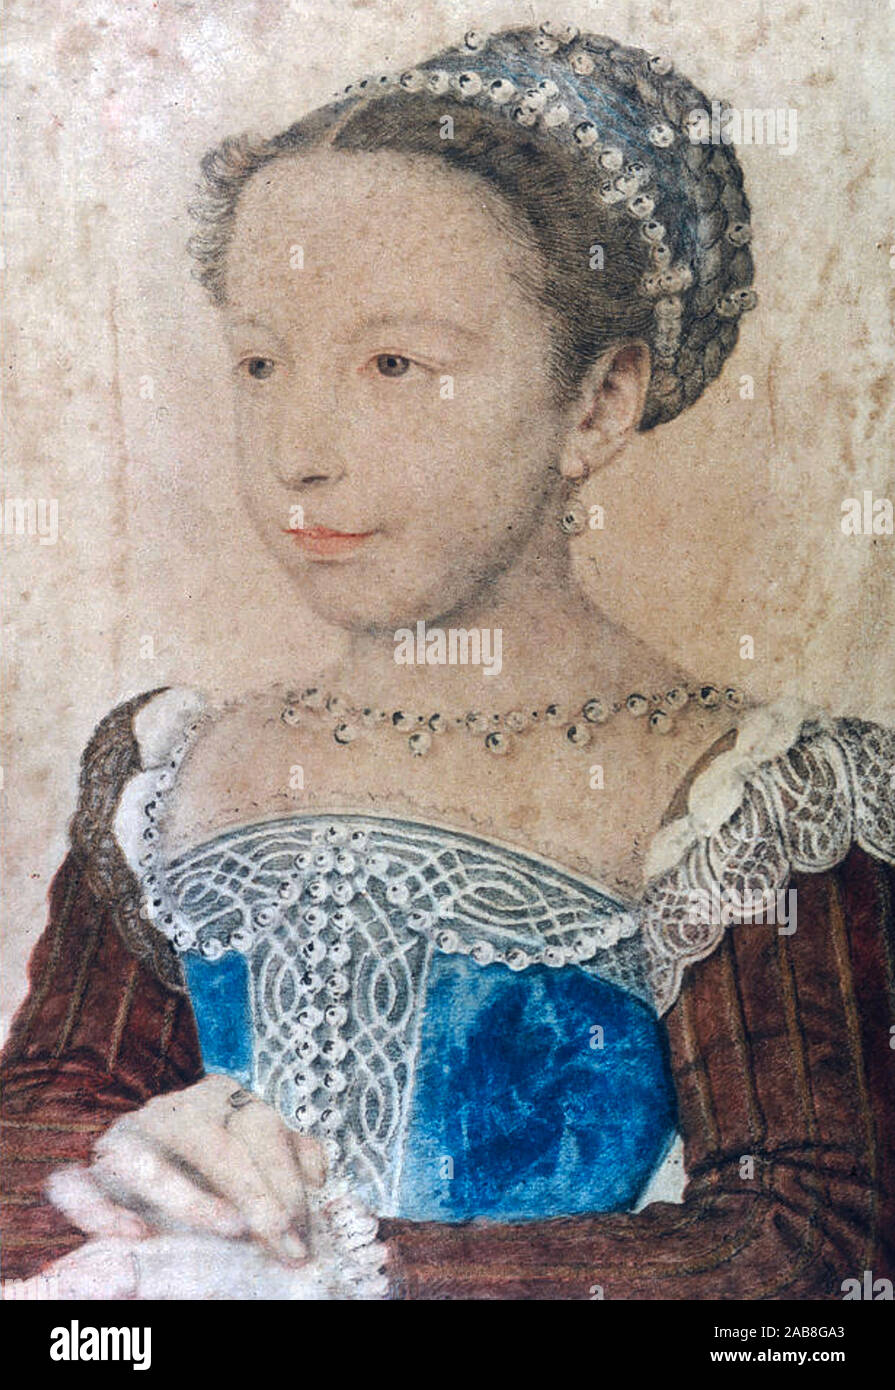 MARGARET de VALOIS (1553-1615) French princess  who married Henry III of Navarre drawn by Francois Clouet Stock Photo